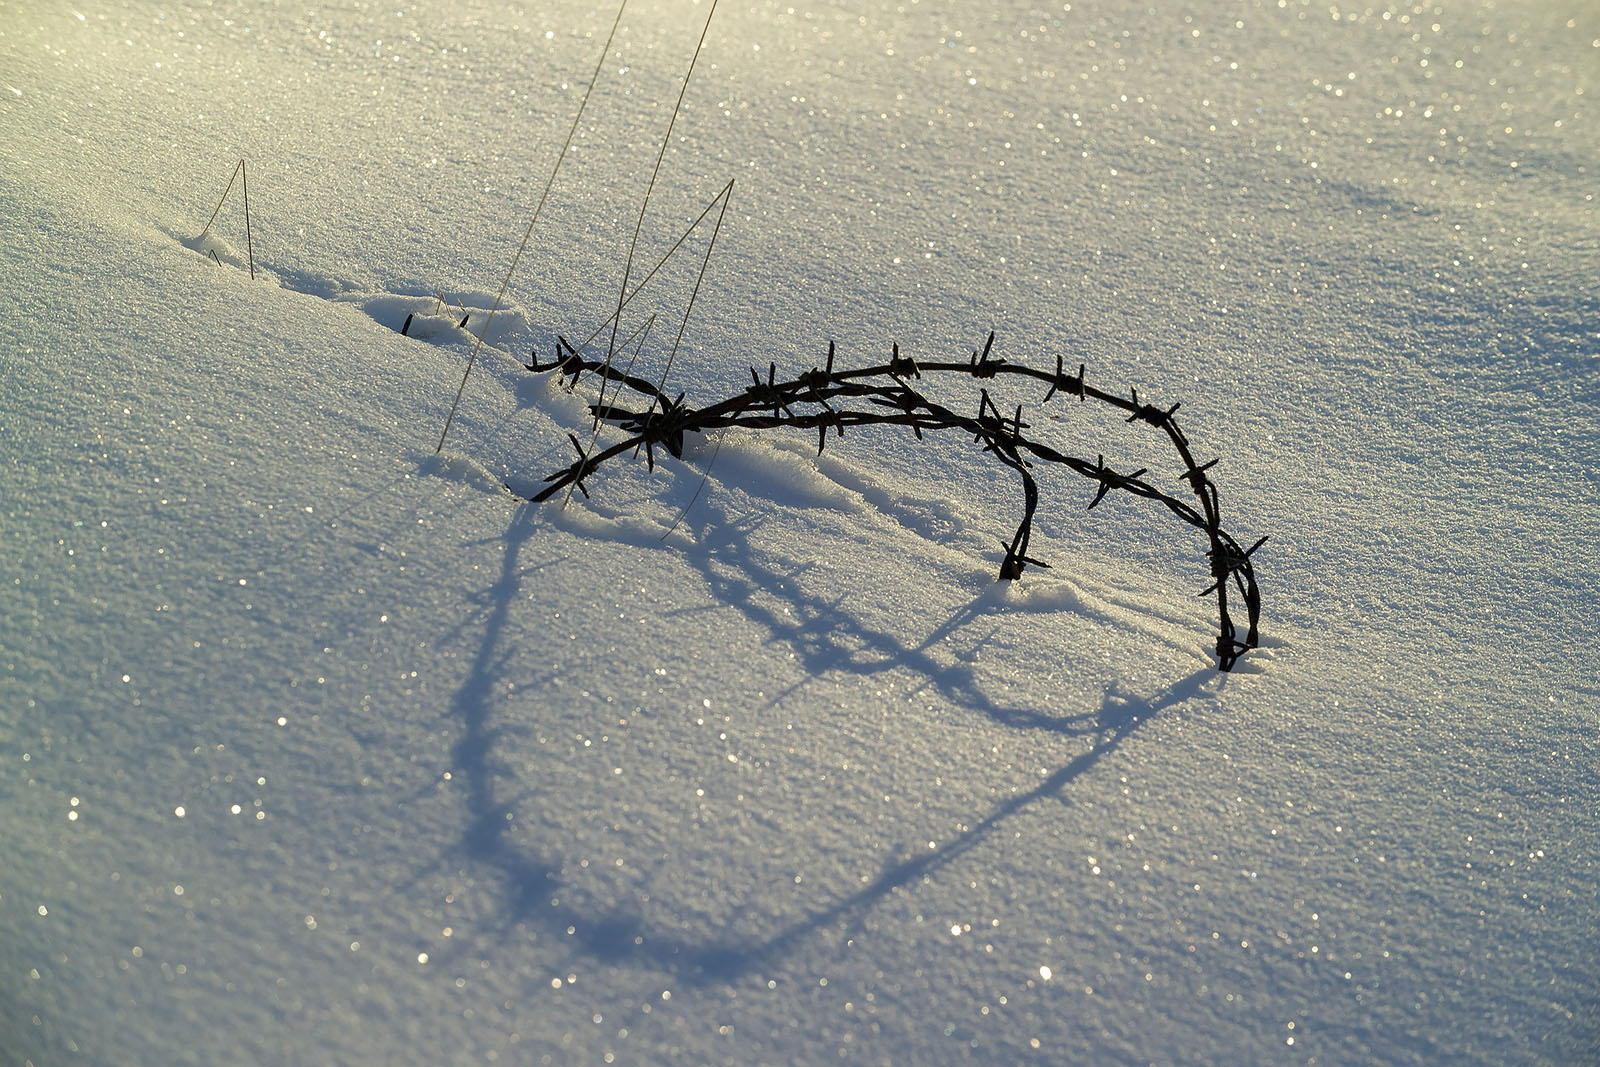 Modern photograph. Close-up of a few strands of barbed wire sticking up from a smooth field of snow.